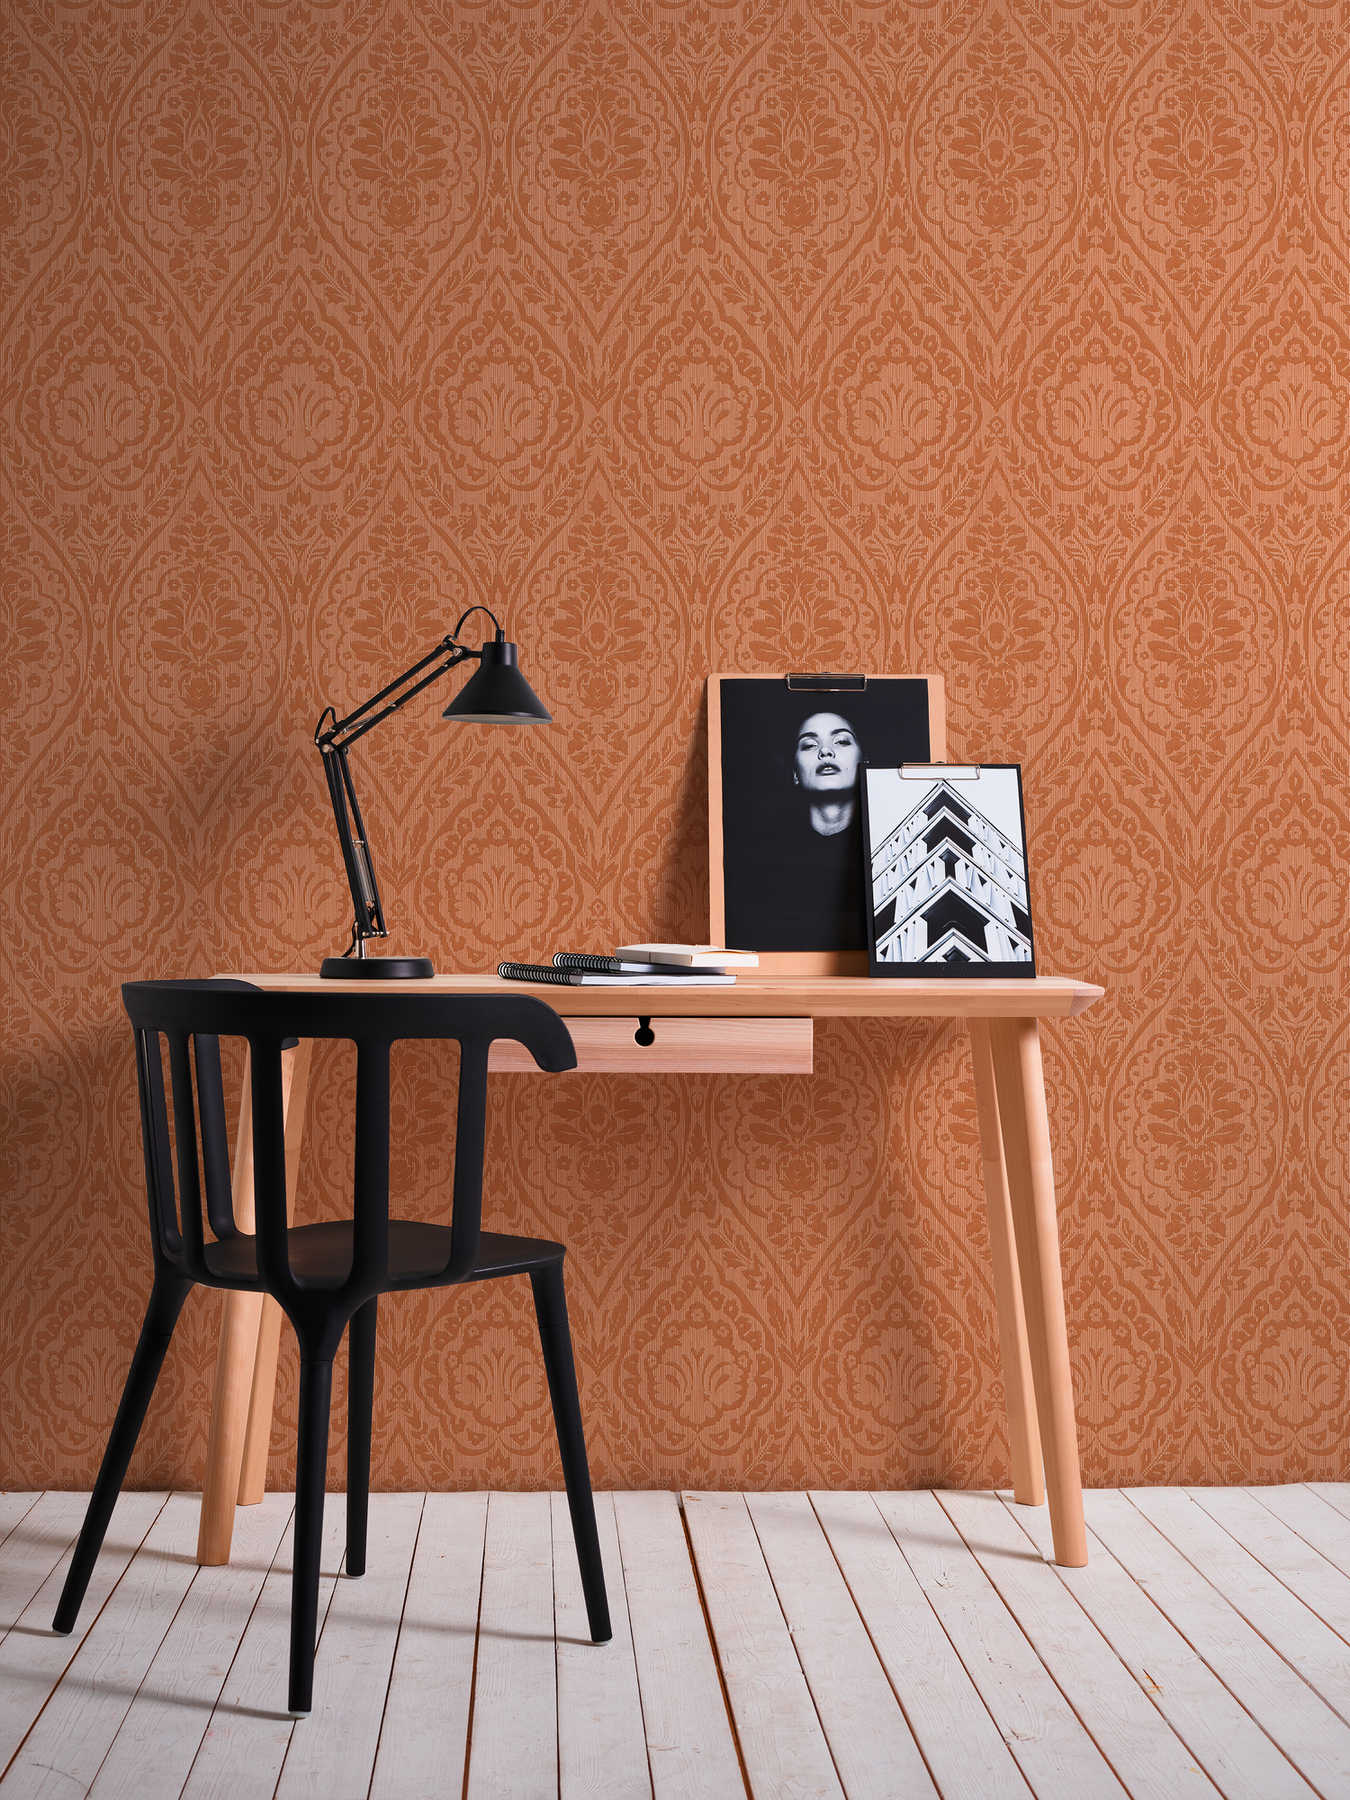             Wallpaper floral ornamental pattern with dimensional texture effect - orange
        